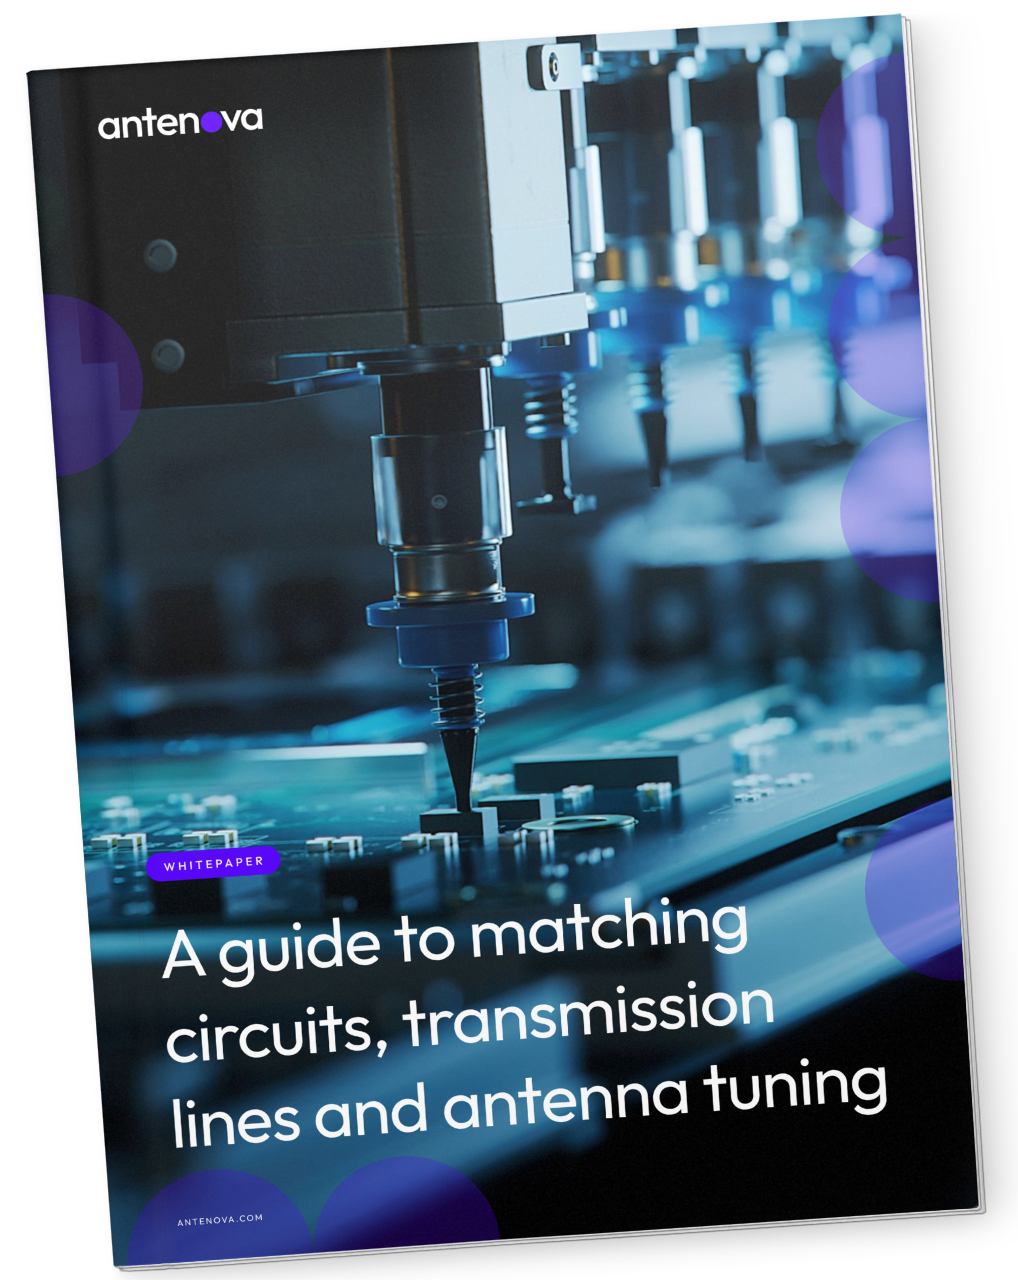 Mission impossible A guide to matching circuits, transmission lines and antenna tuning (1)